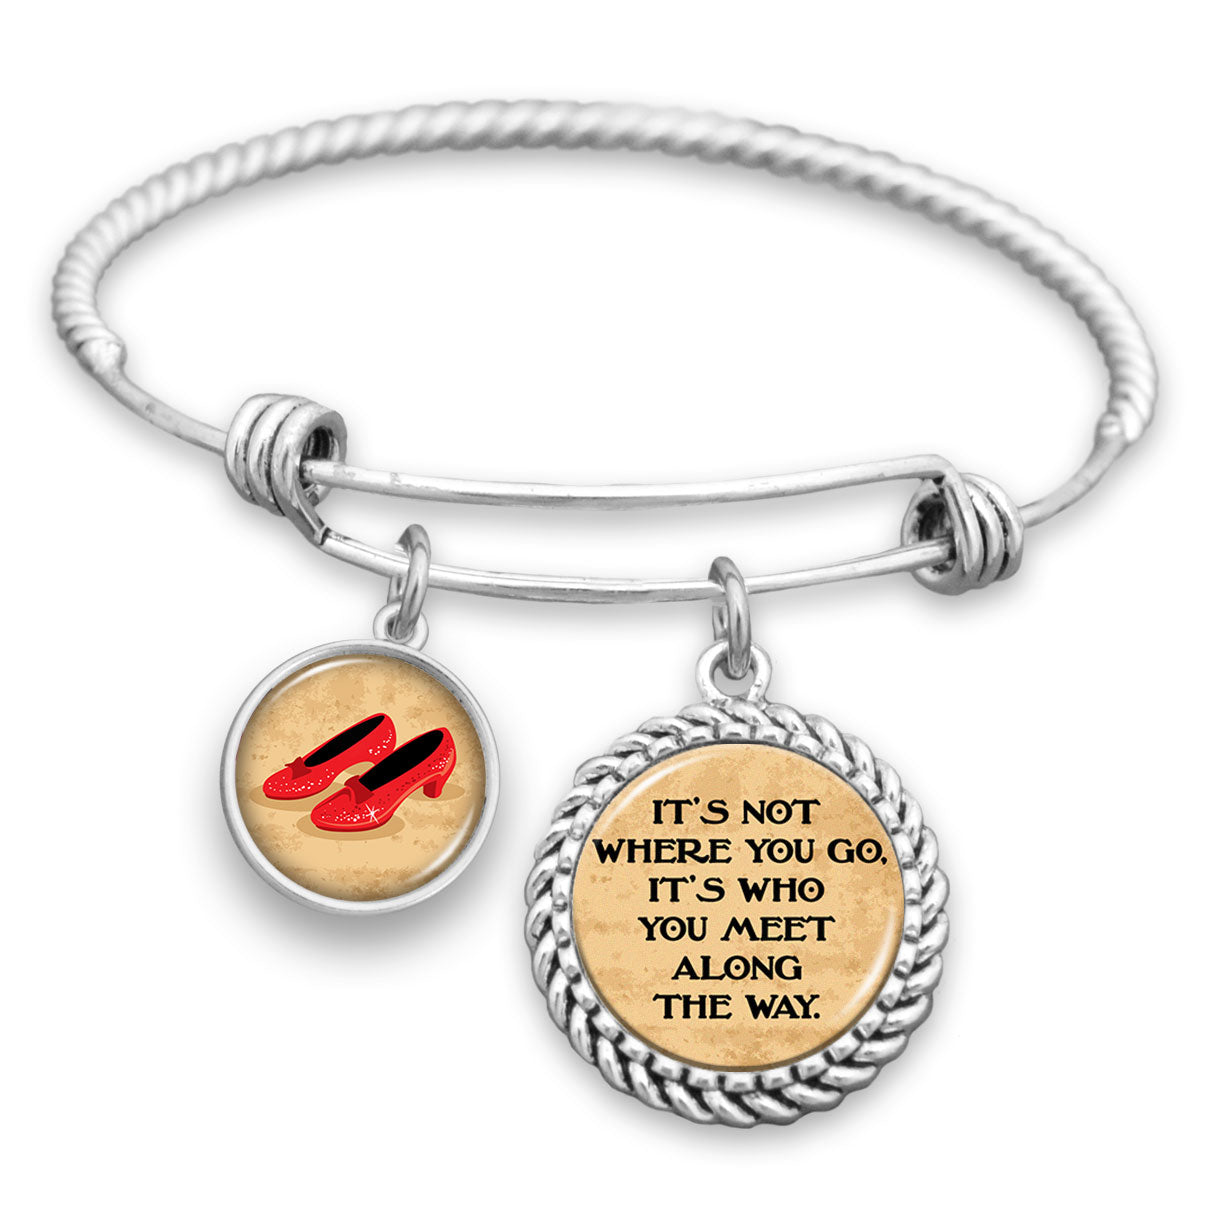 It's Not Where You Go, It's Who You Meet Along The Way Charm Bracelet